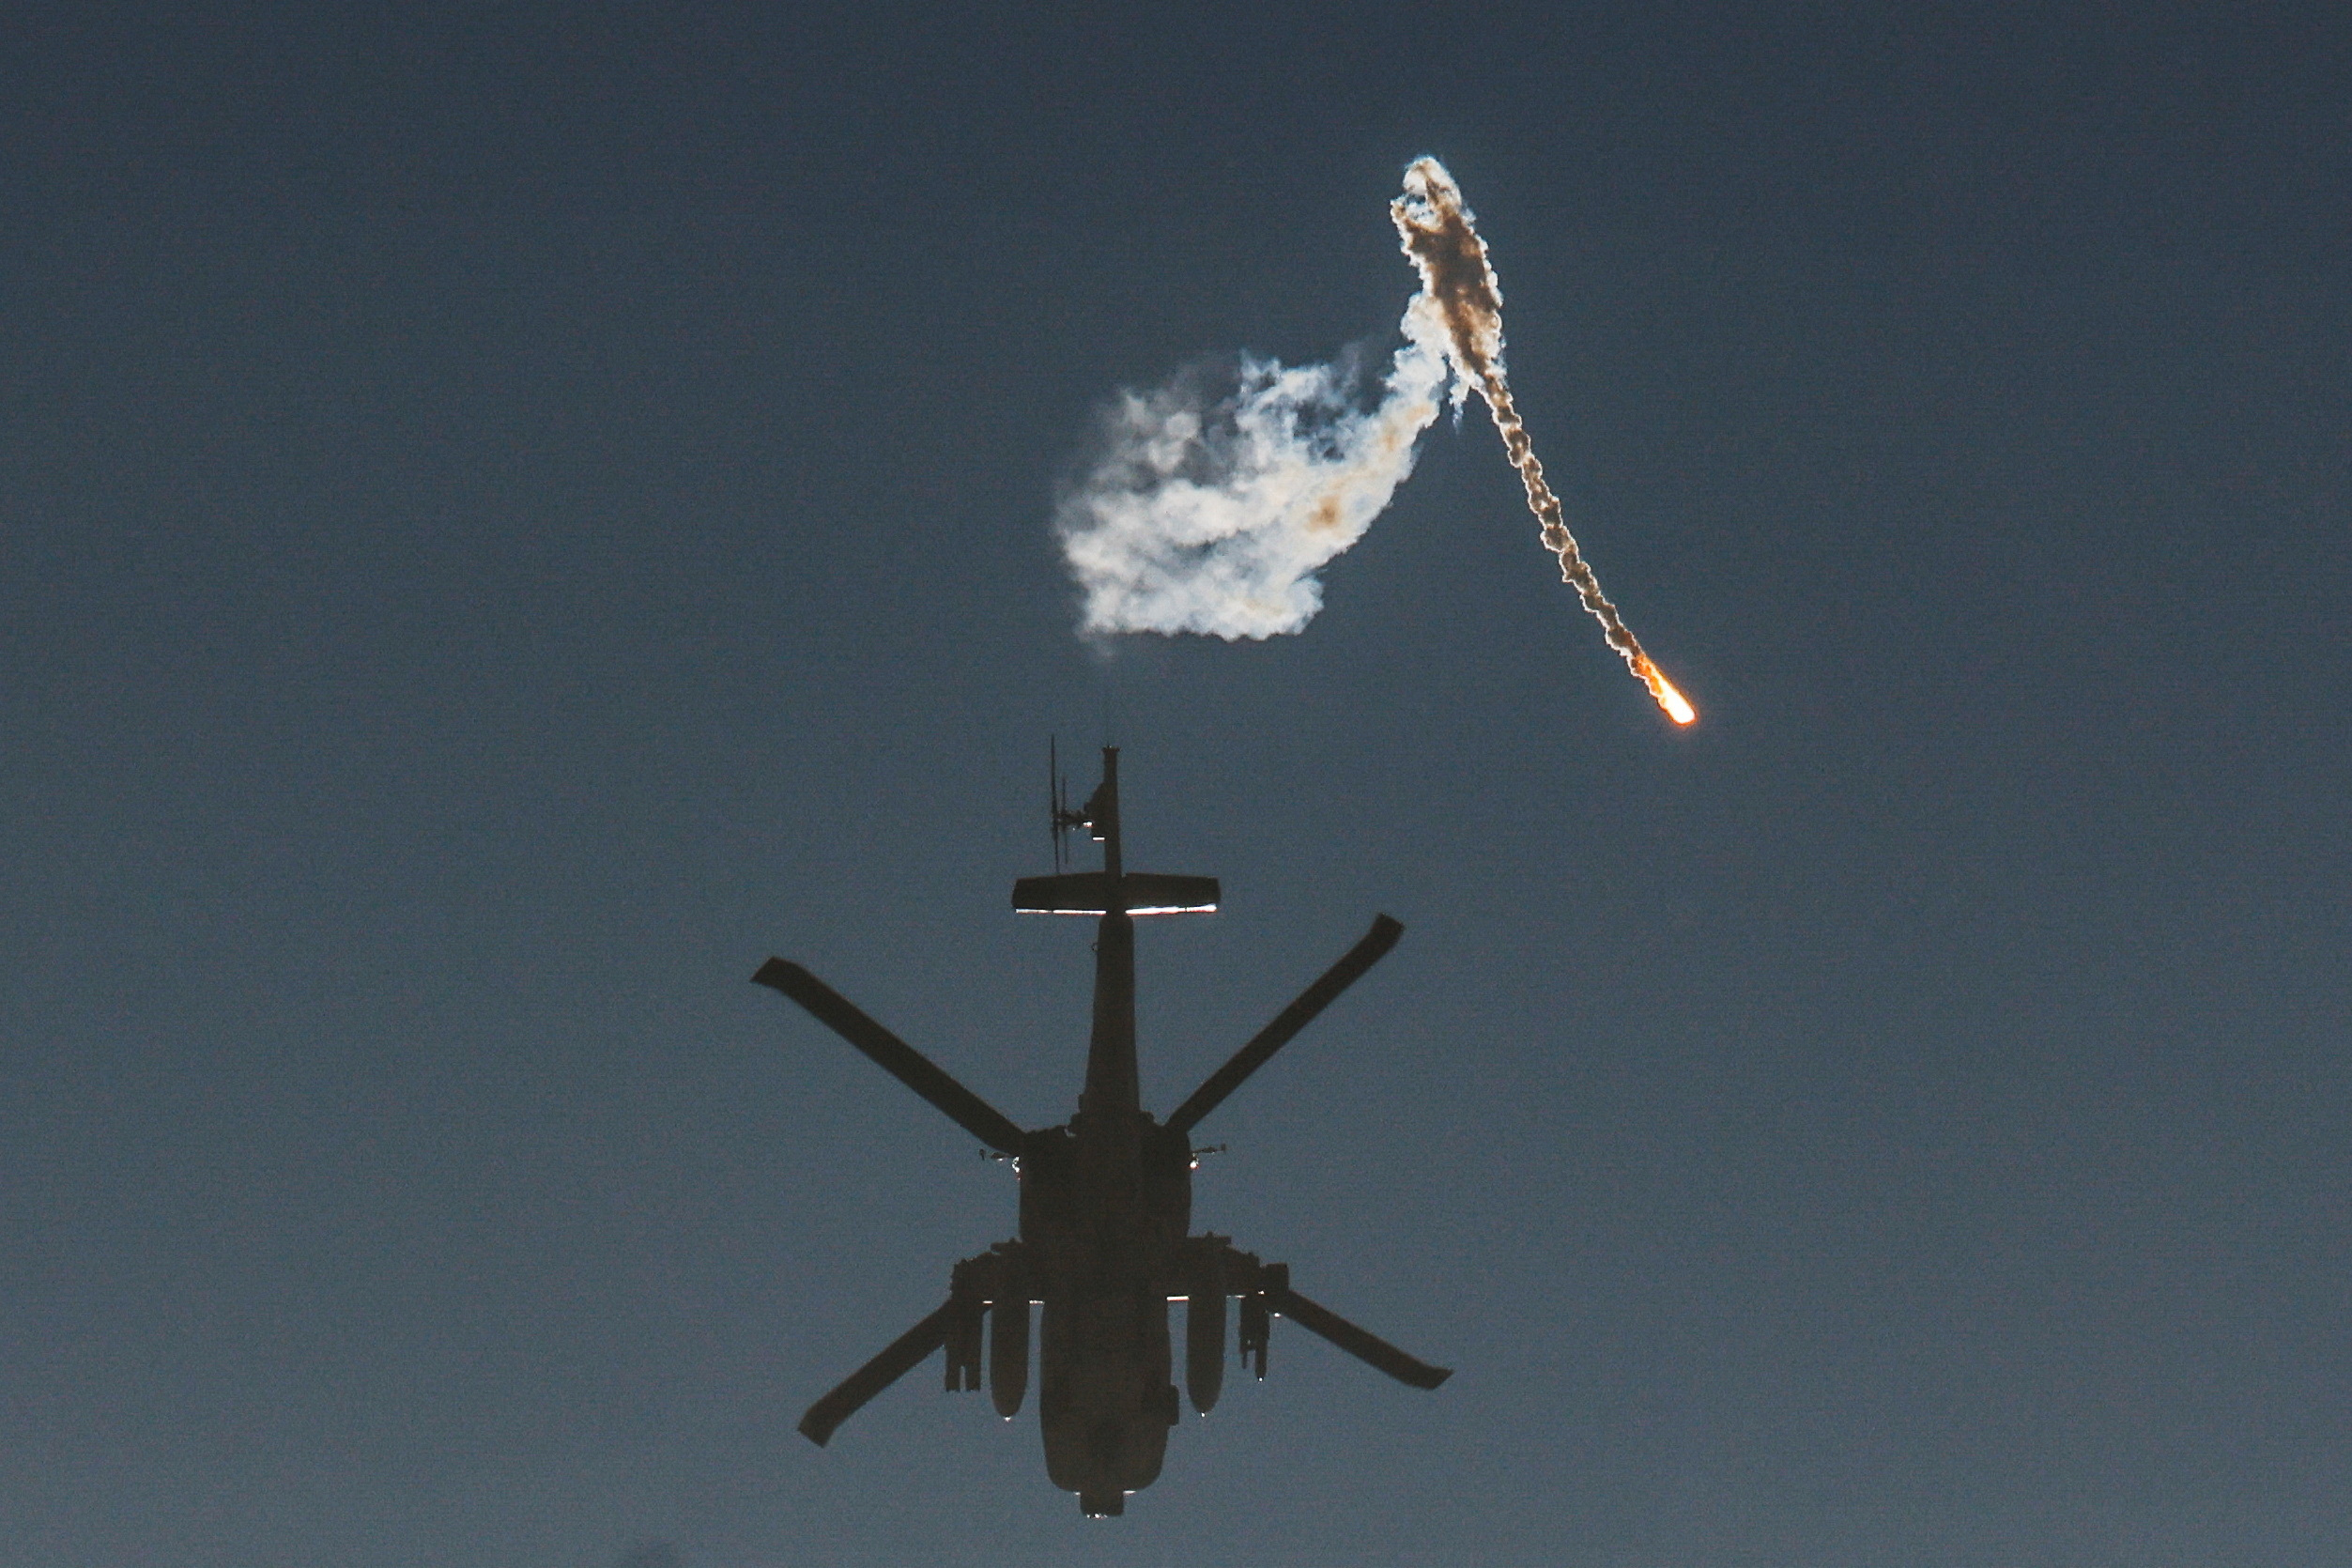 An Israeli military helicopter releases a flare over the Israel-Gaza border, after a temporary truce between Israel and the Palestinian Islamist group Hamas expired, as seen from southern Israel